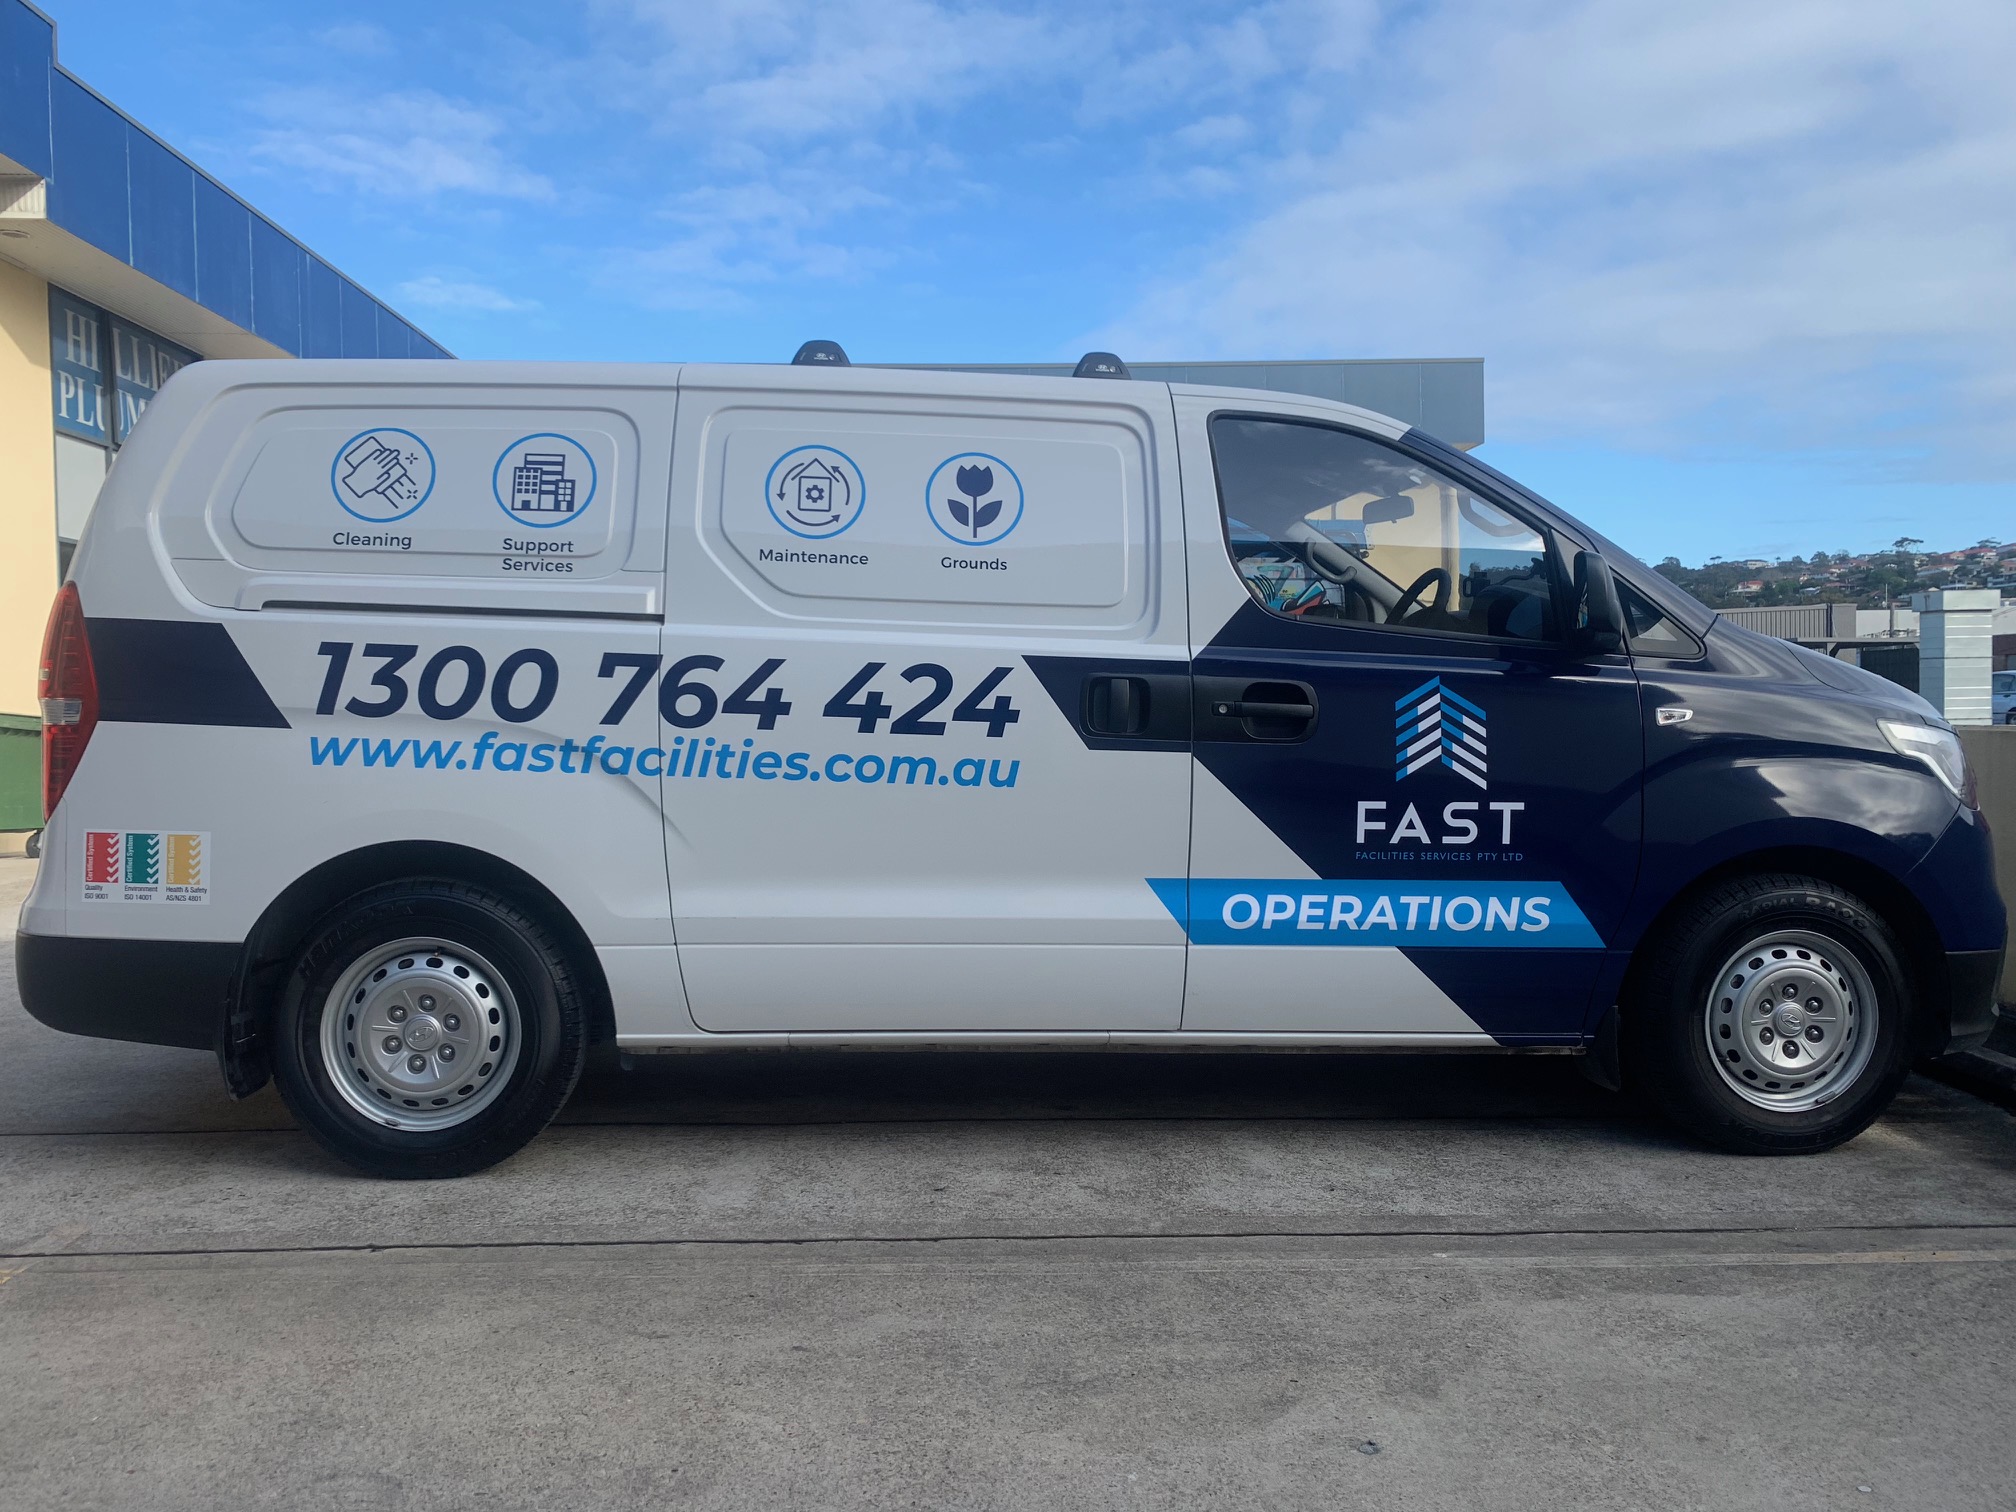 Making The Most Of Your Vehicle Advertising: All You Need To Know About Van Graphics